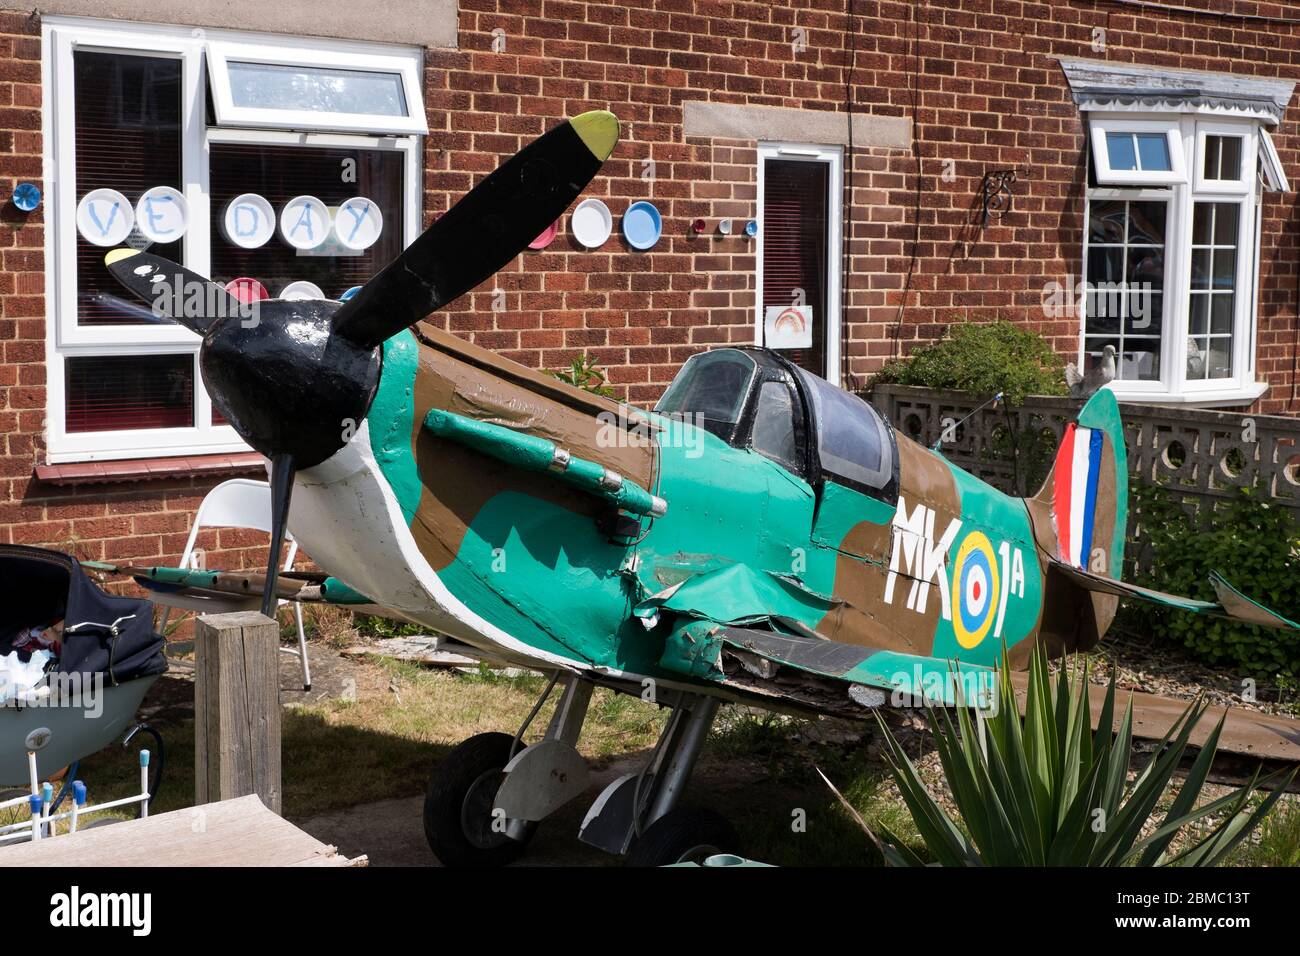 A large scale model Spitfire fighter plane in a front garden in Bugbrooke, Northamptonshire Stock Photo